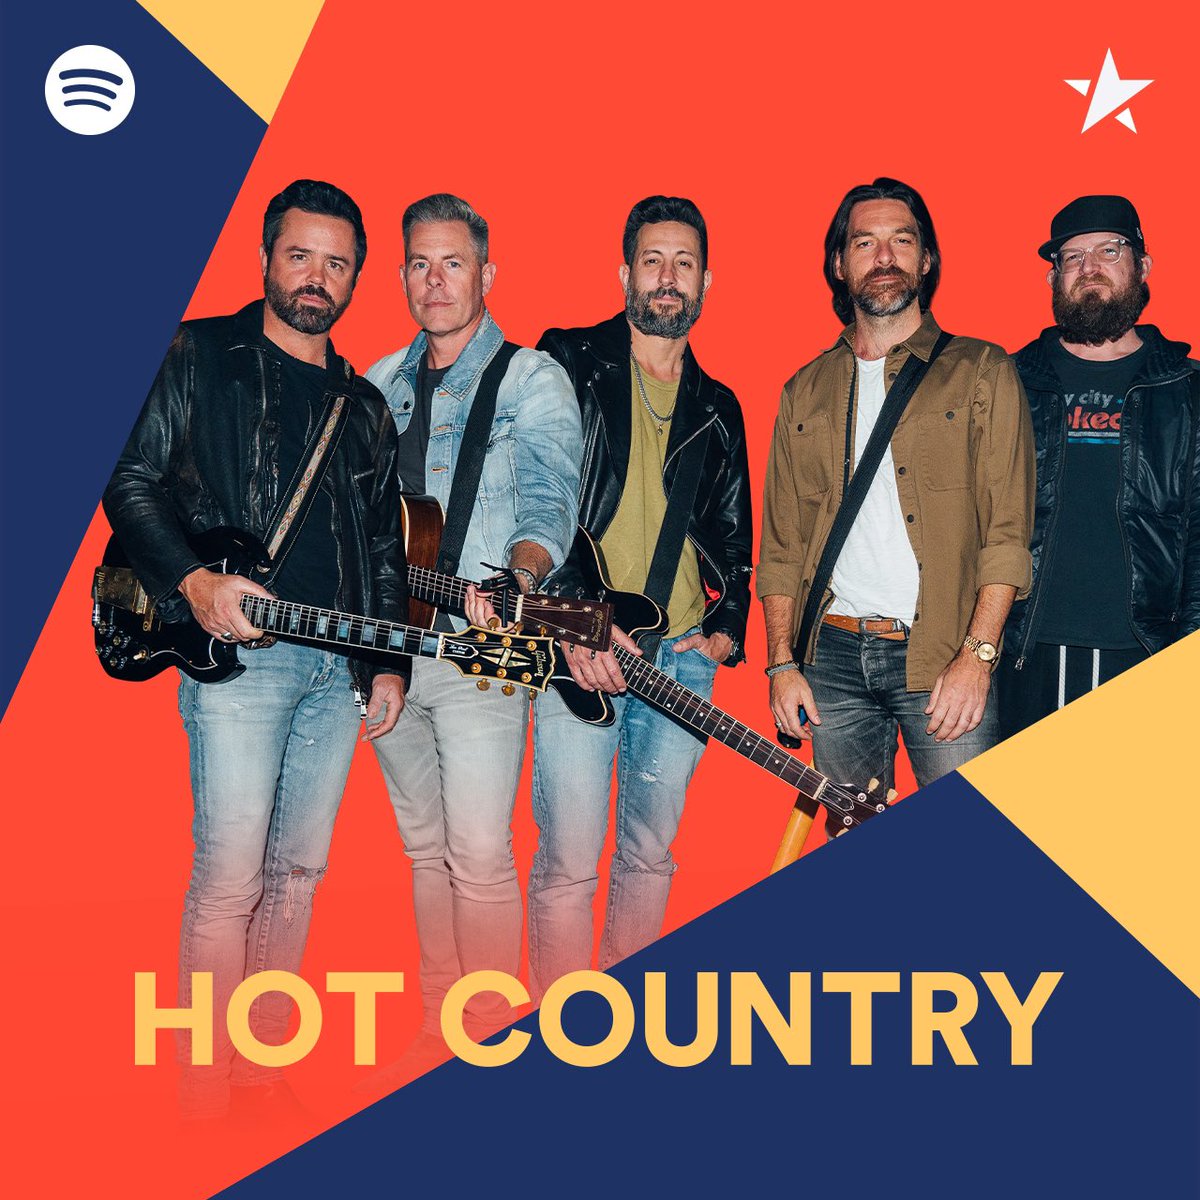 .@spotify with the love 👊 Listen to #MemoryLane on #hotcountry OD.lnk.to/HotCountry